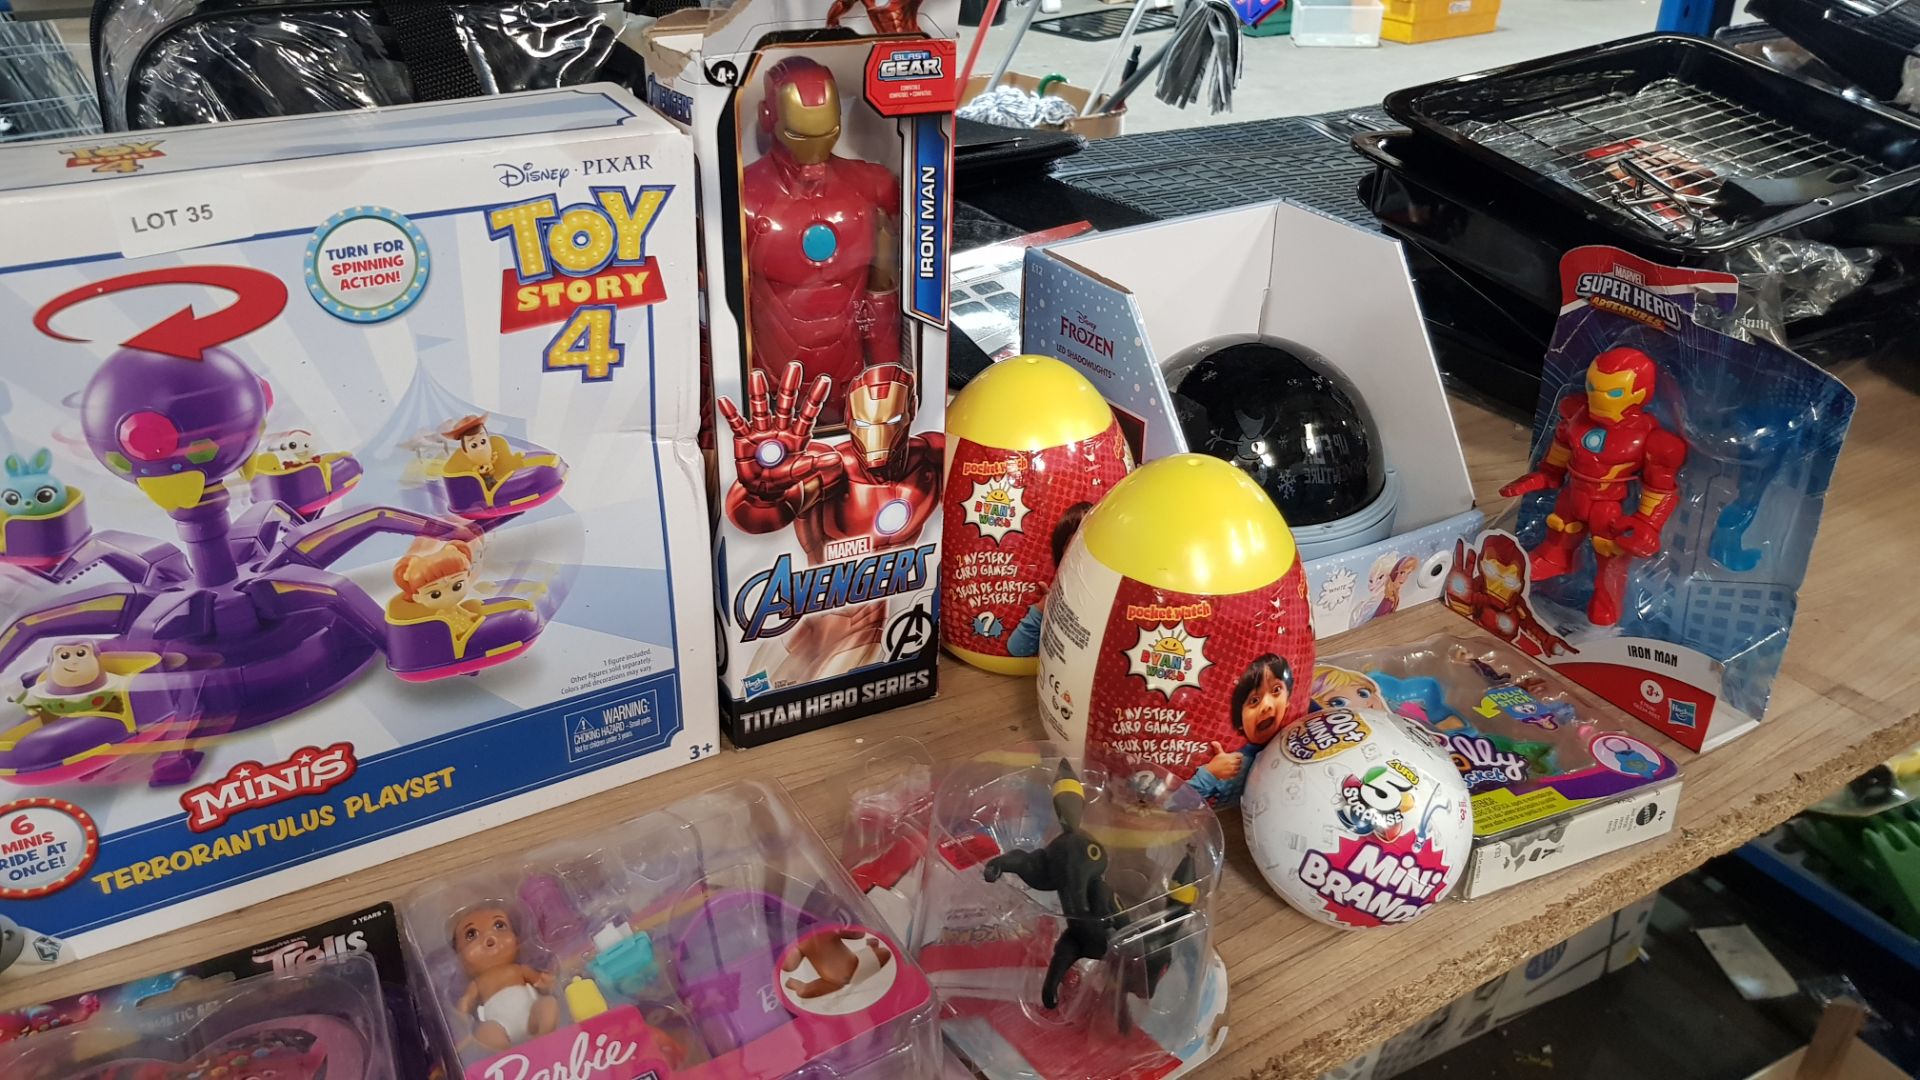 (R3I) Toys. 12 Items. To Include 2 X Avengers Titan Hero Series Dolls, 1 X Toy Story 4 Minis Terr - Image 3 of 3